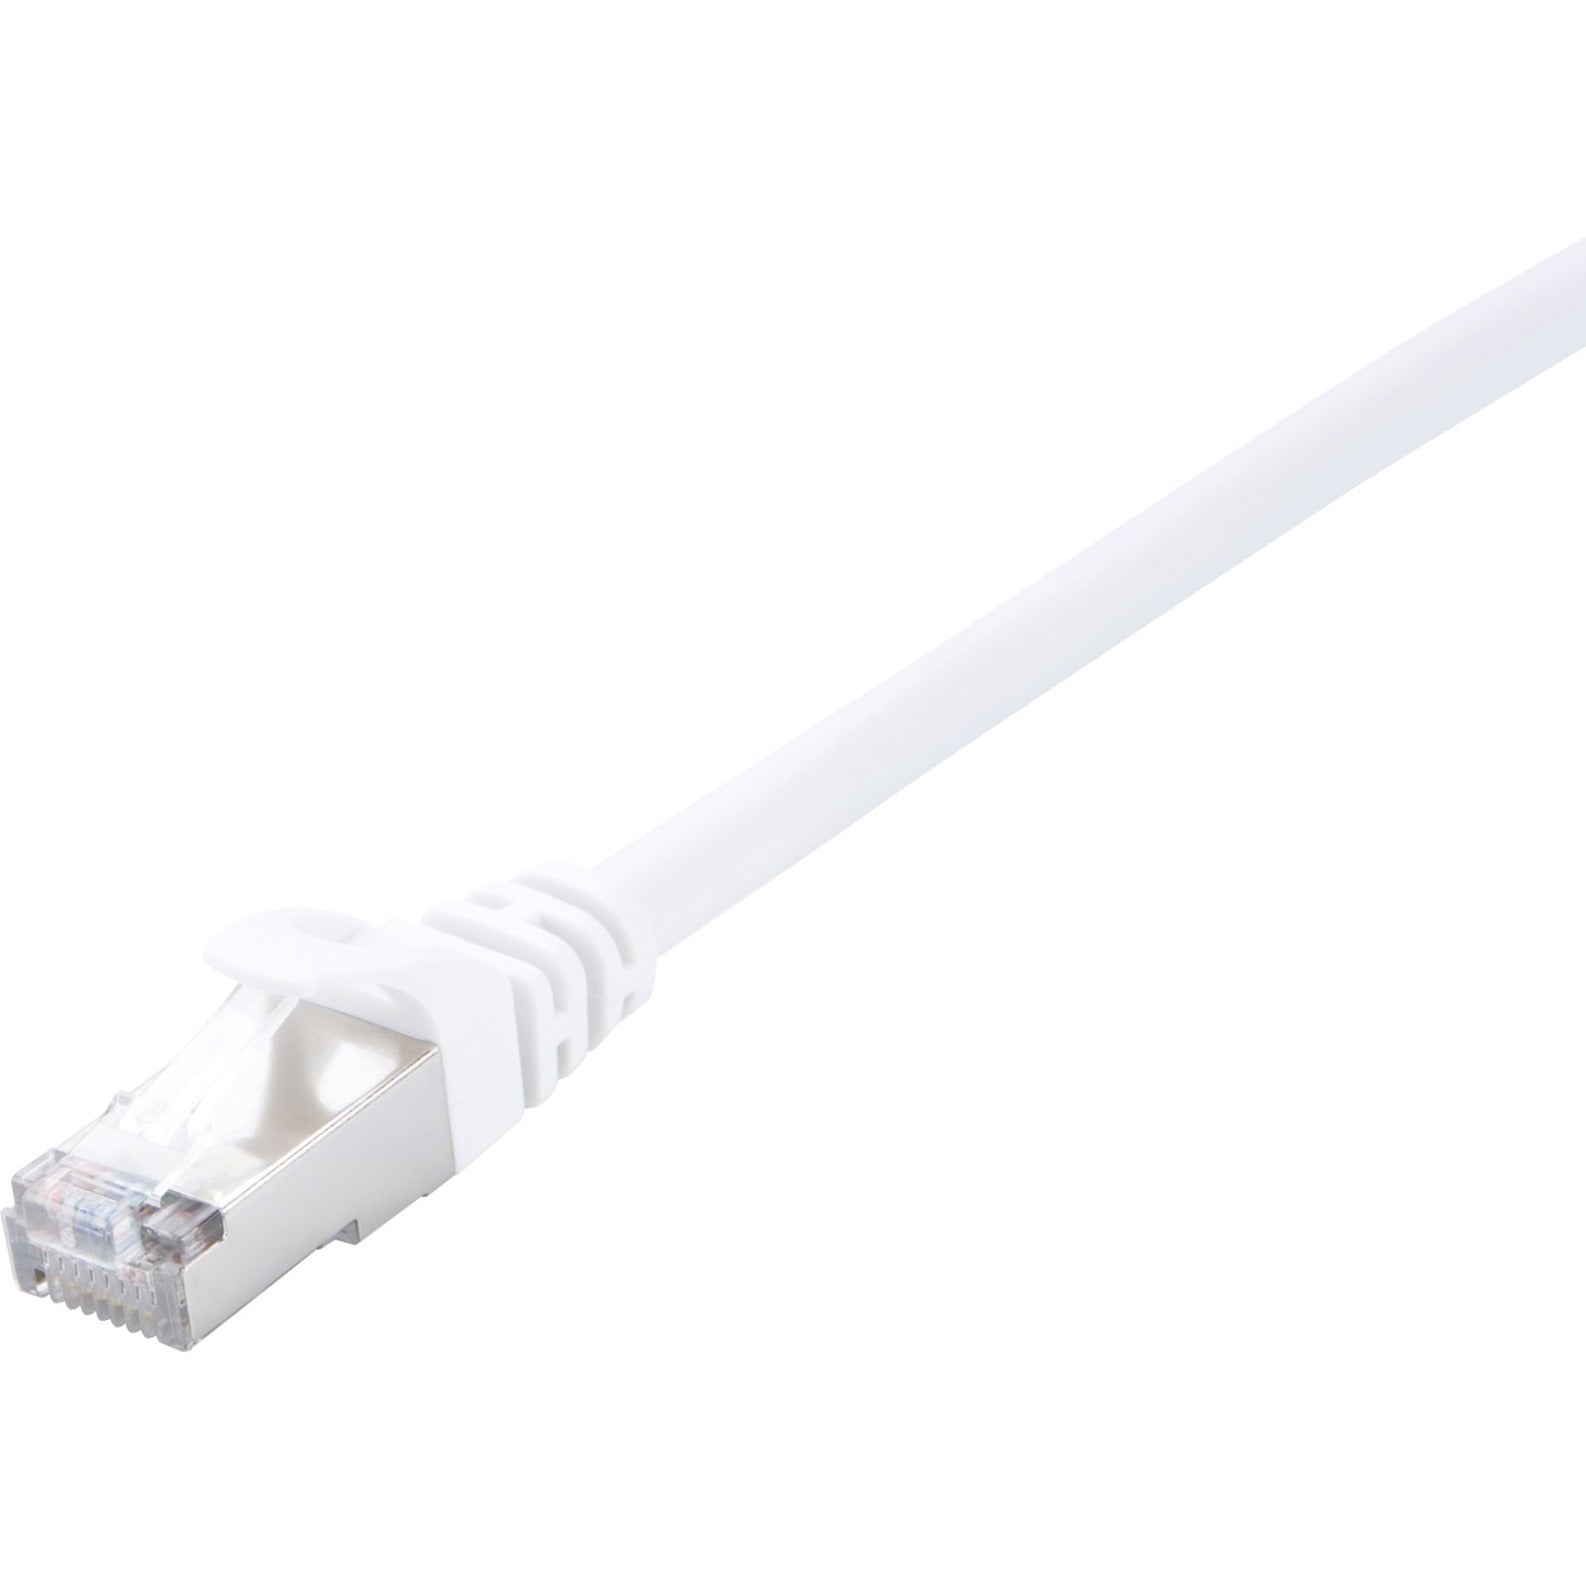 V7 V7CAT6STP-01M-WHT-1N White Cat6 Shielded (STP) Cable RJ45 Male to RJ45 Male 1m 3.3ft, Strain Relief, Locking Latch, Crosstalk Protection, Noise Reducing